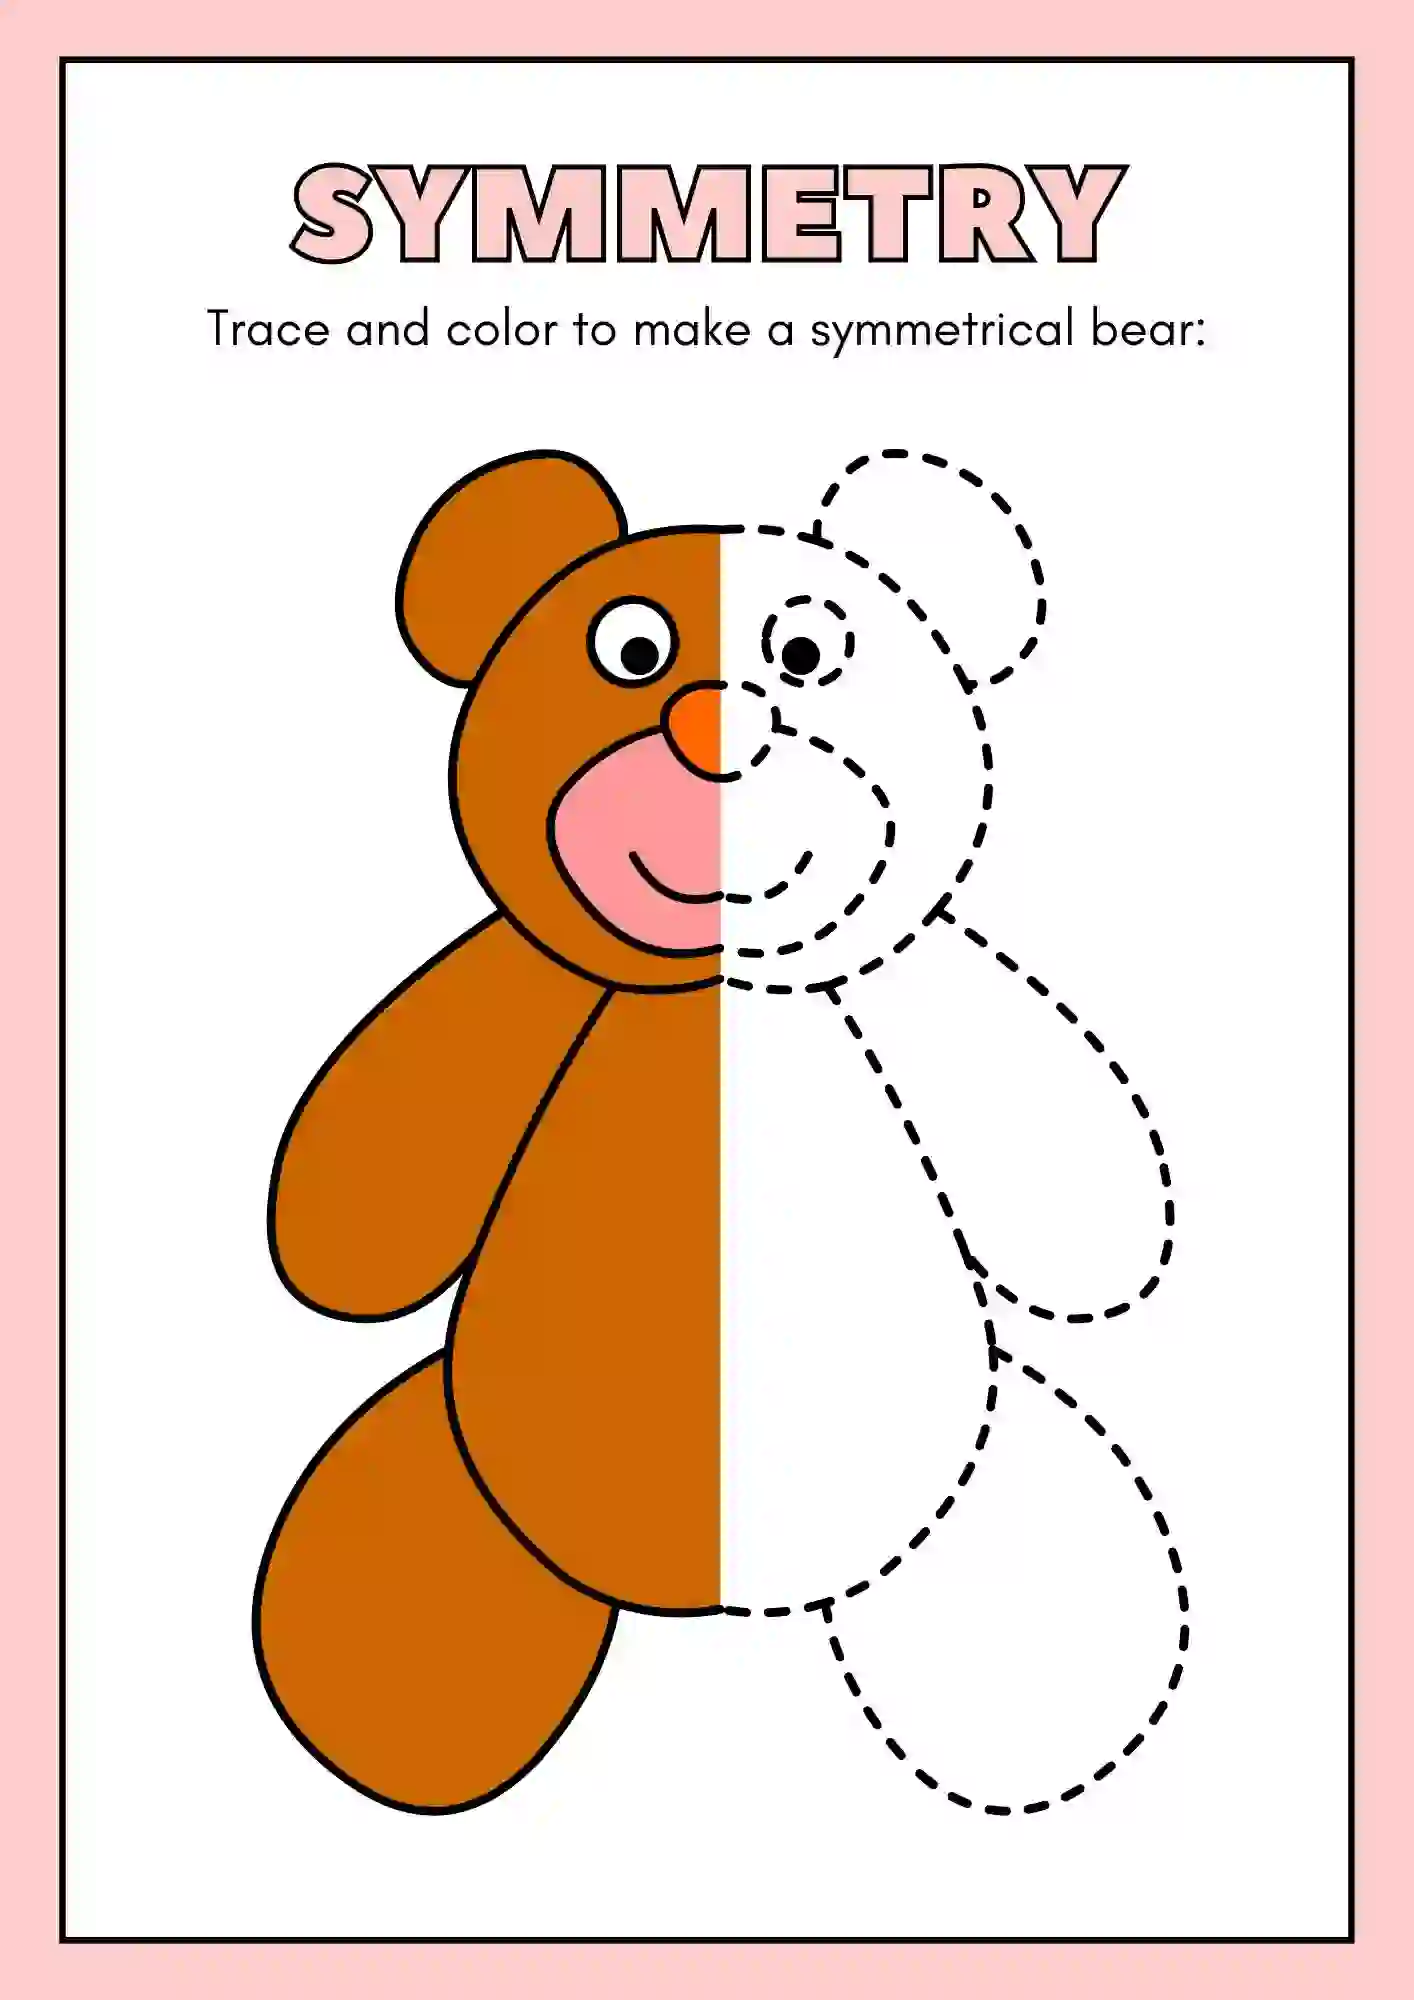 Symmetric Drawing and Coloring worksheets (teddy bear)